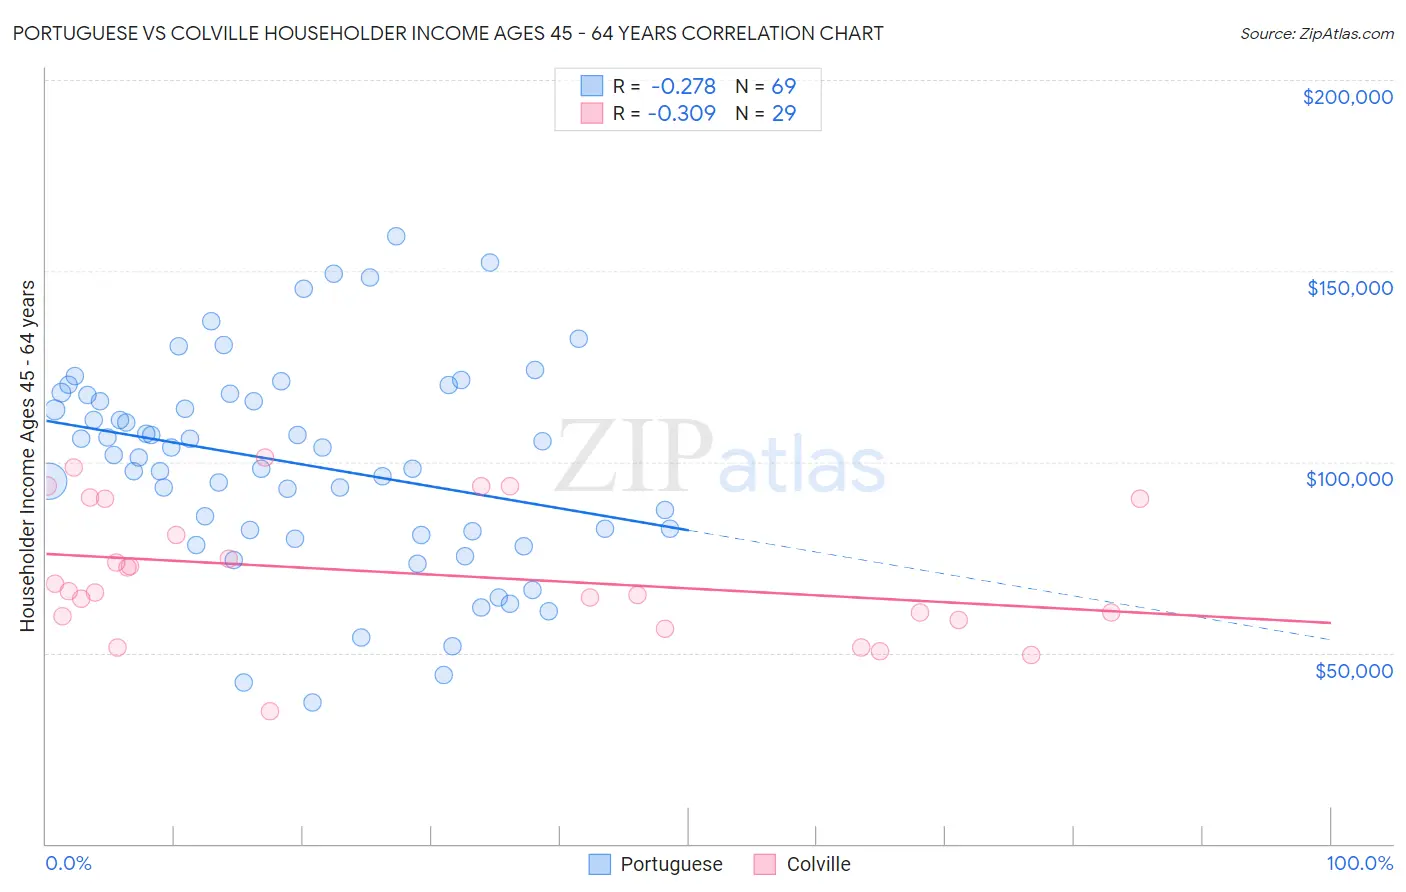 Portuguese vs Colville Householder Income Ages 45 - 64 years